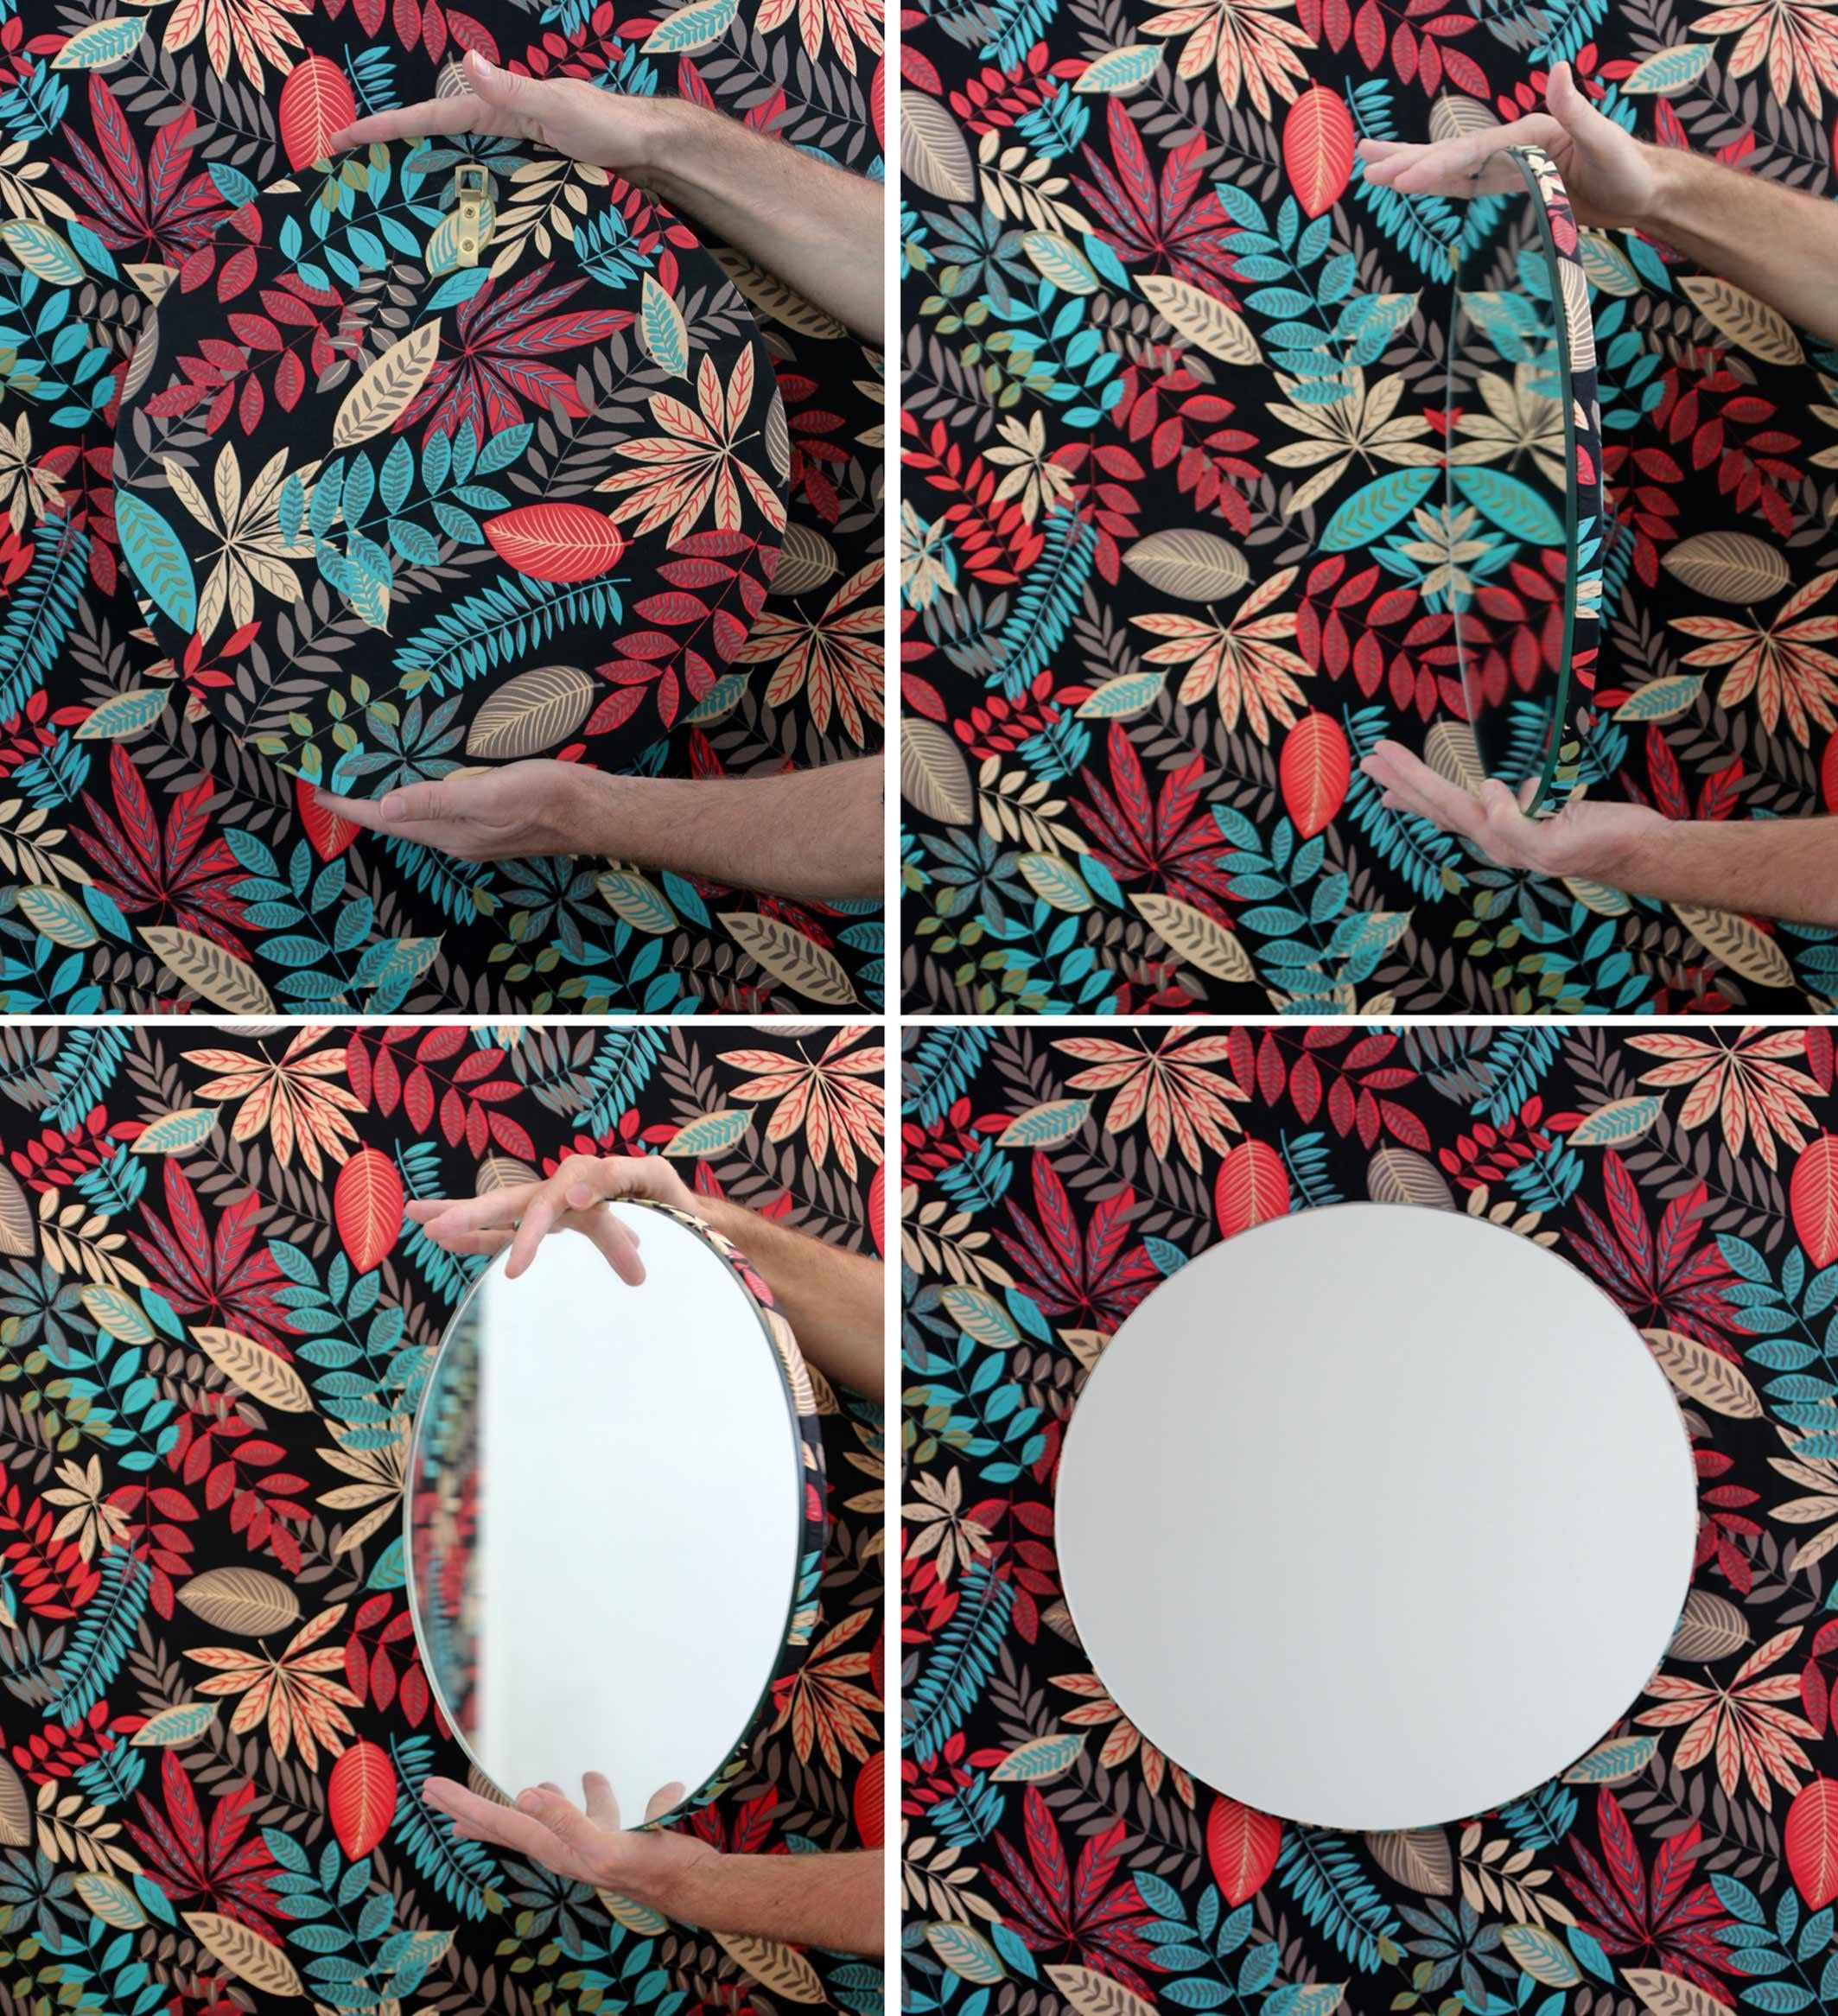 Delightful handcrafted silver round mirror with a modern floral printed fabric backing.

Available in:

Measures: Small: 40cm / 15.8